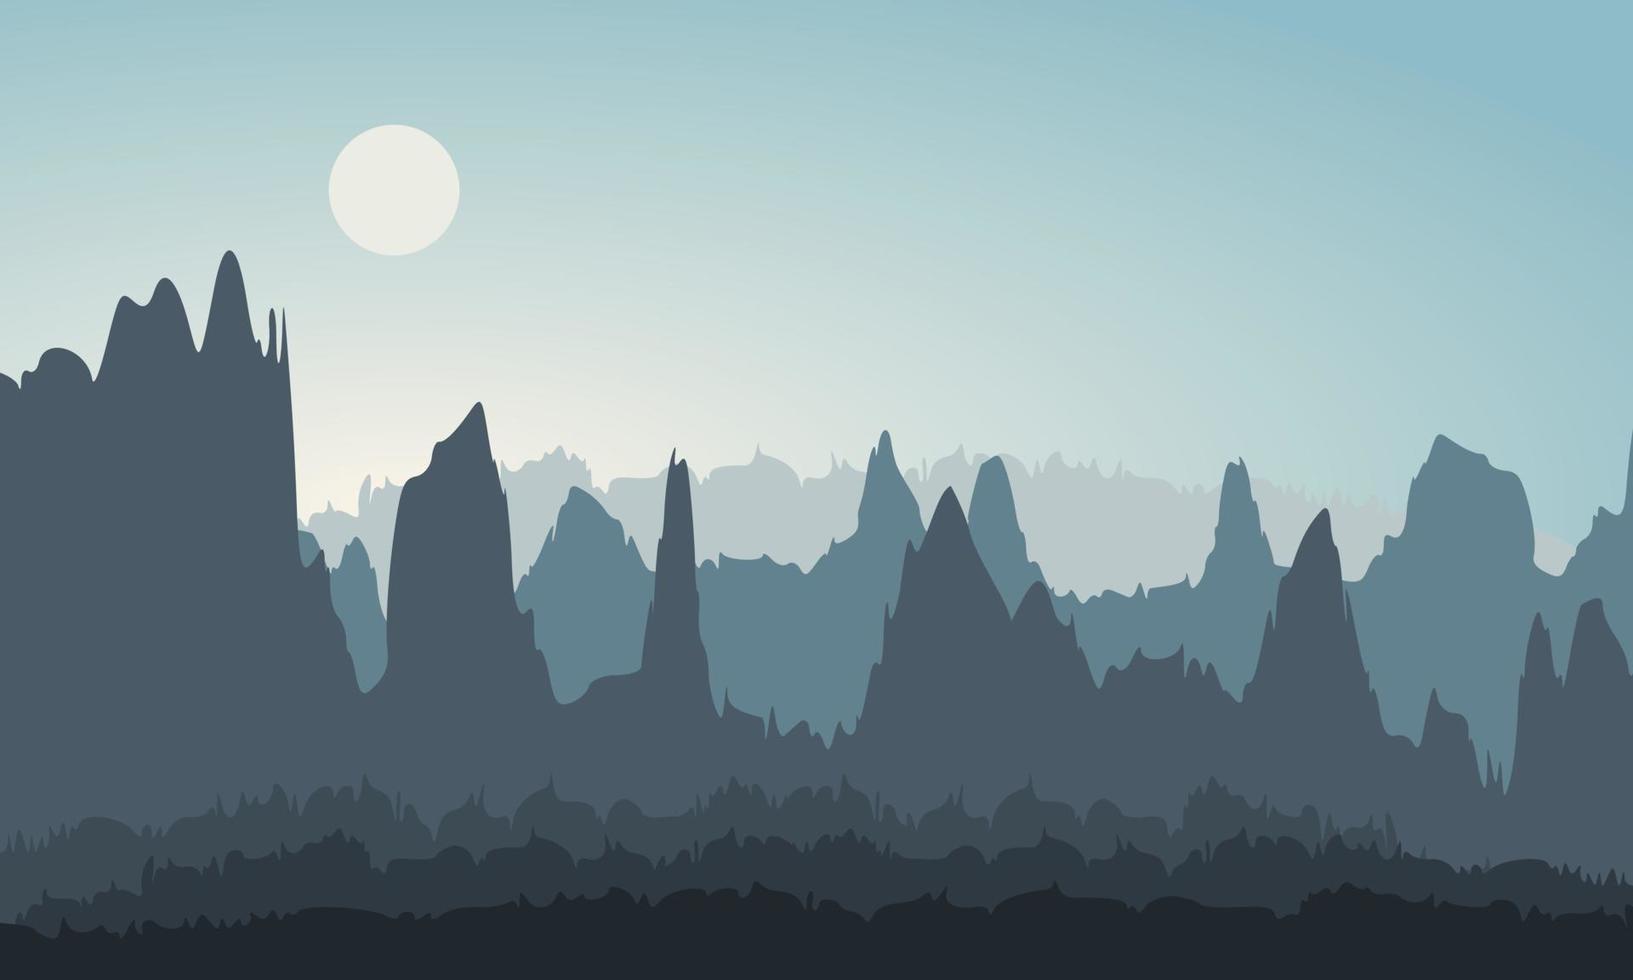 Abstract silhouette of mountain landscapes vector illustration background